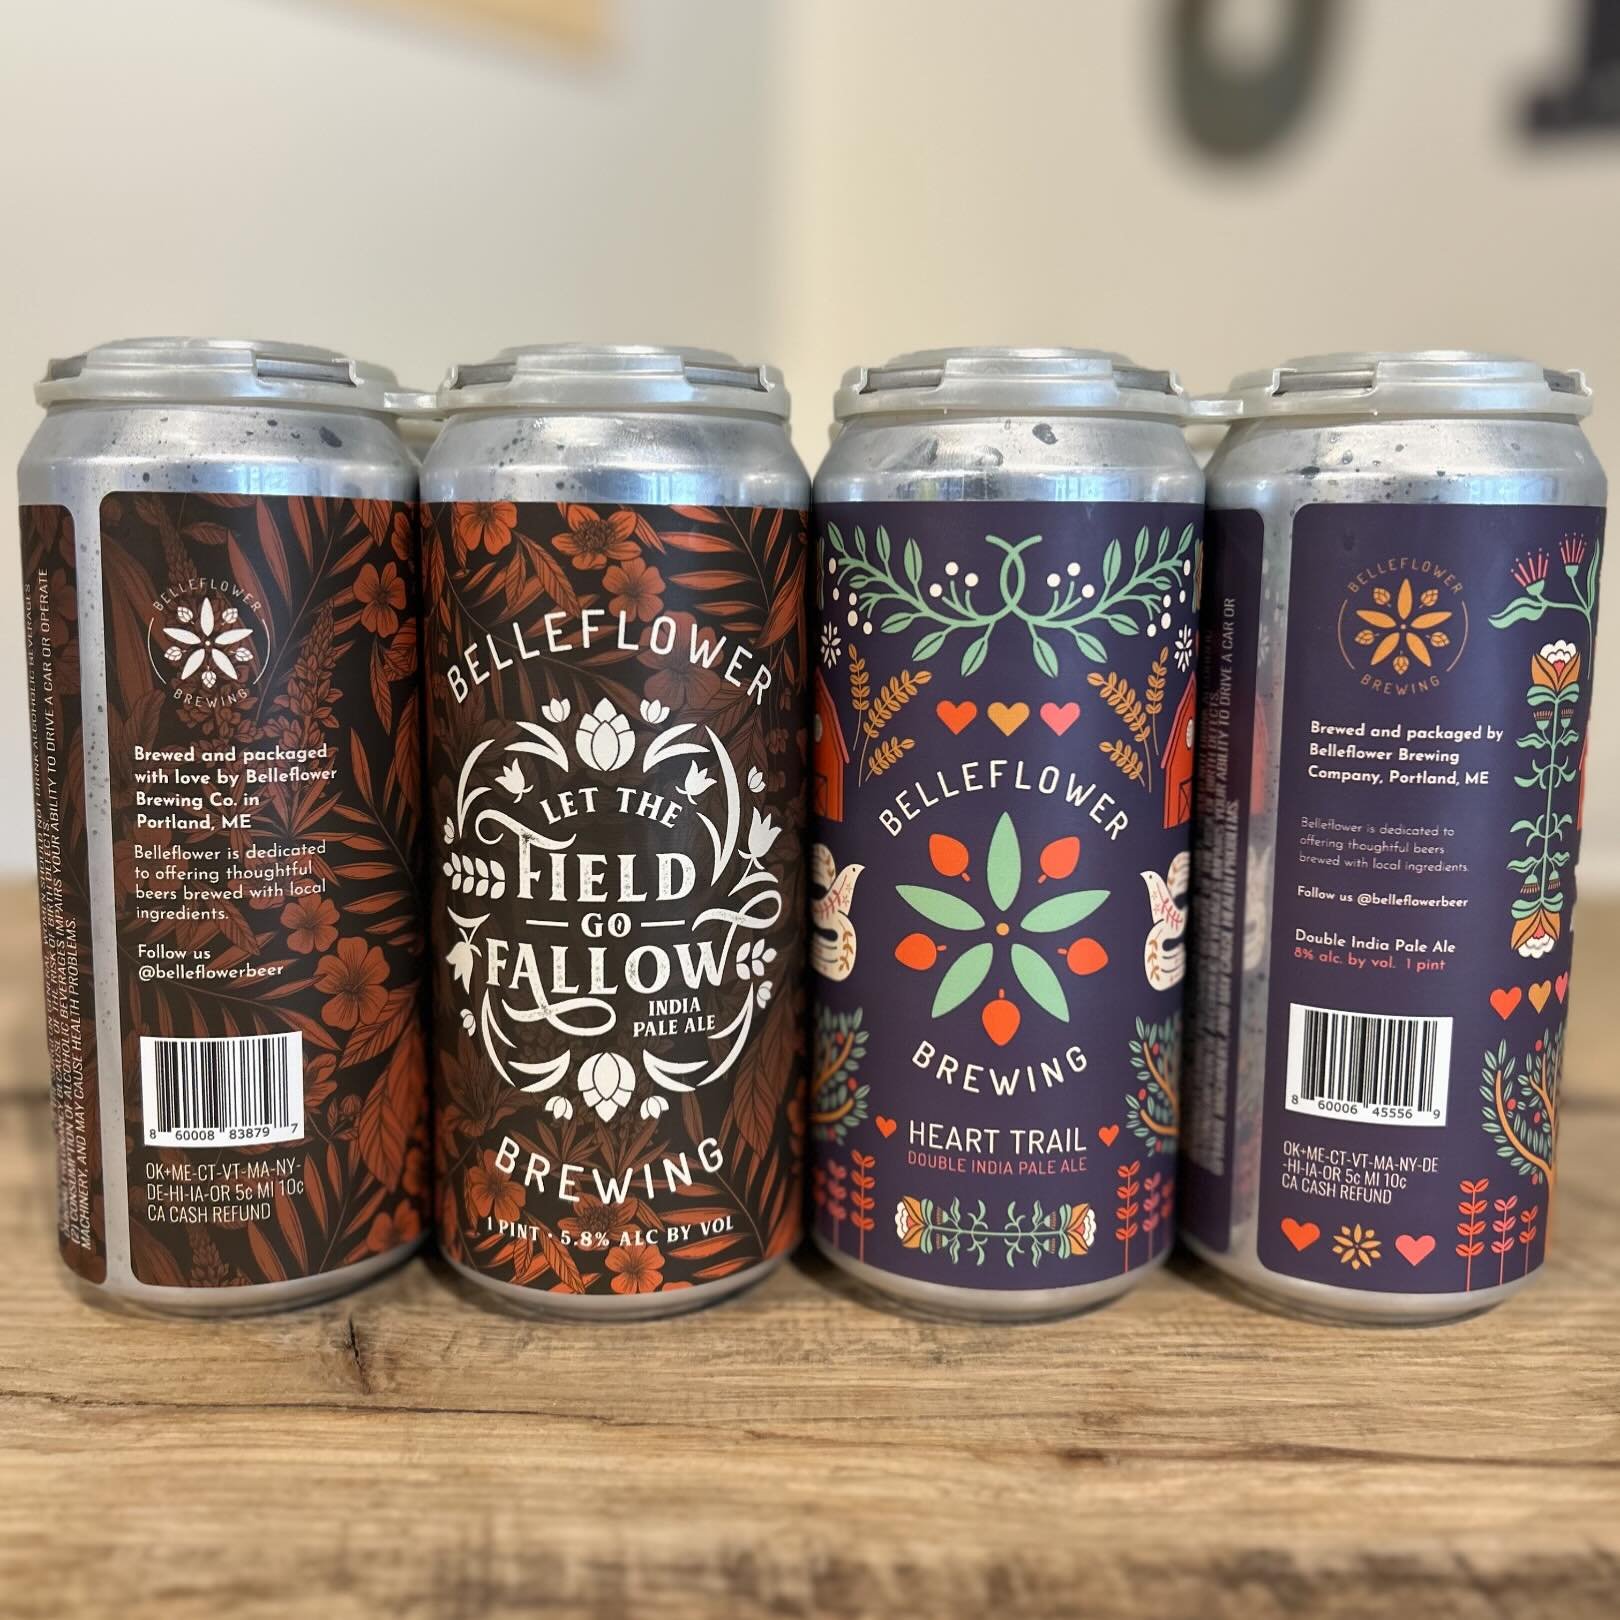 Fresh @belleflowerbeer #NowAvailable #SudburyCraftBeer #SudburyMA
&mdash;
Let the Field Go Fallow features Enigma and HBC 586 hops packed into a sessionable IPA. Brewed with a combo of spelt, wheat, and oats on top of a delicate pilsner base. Let the